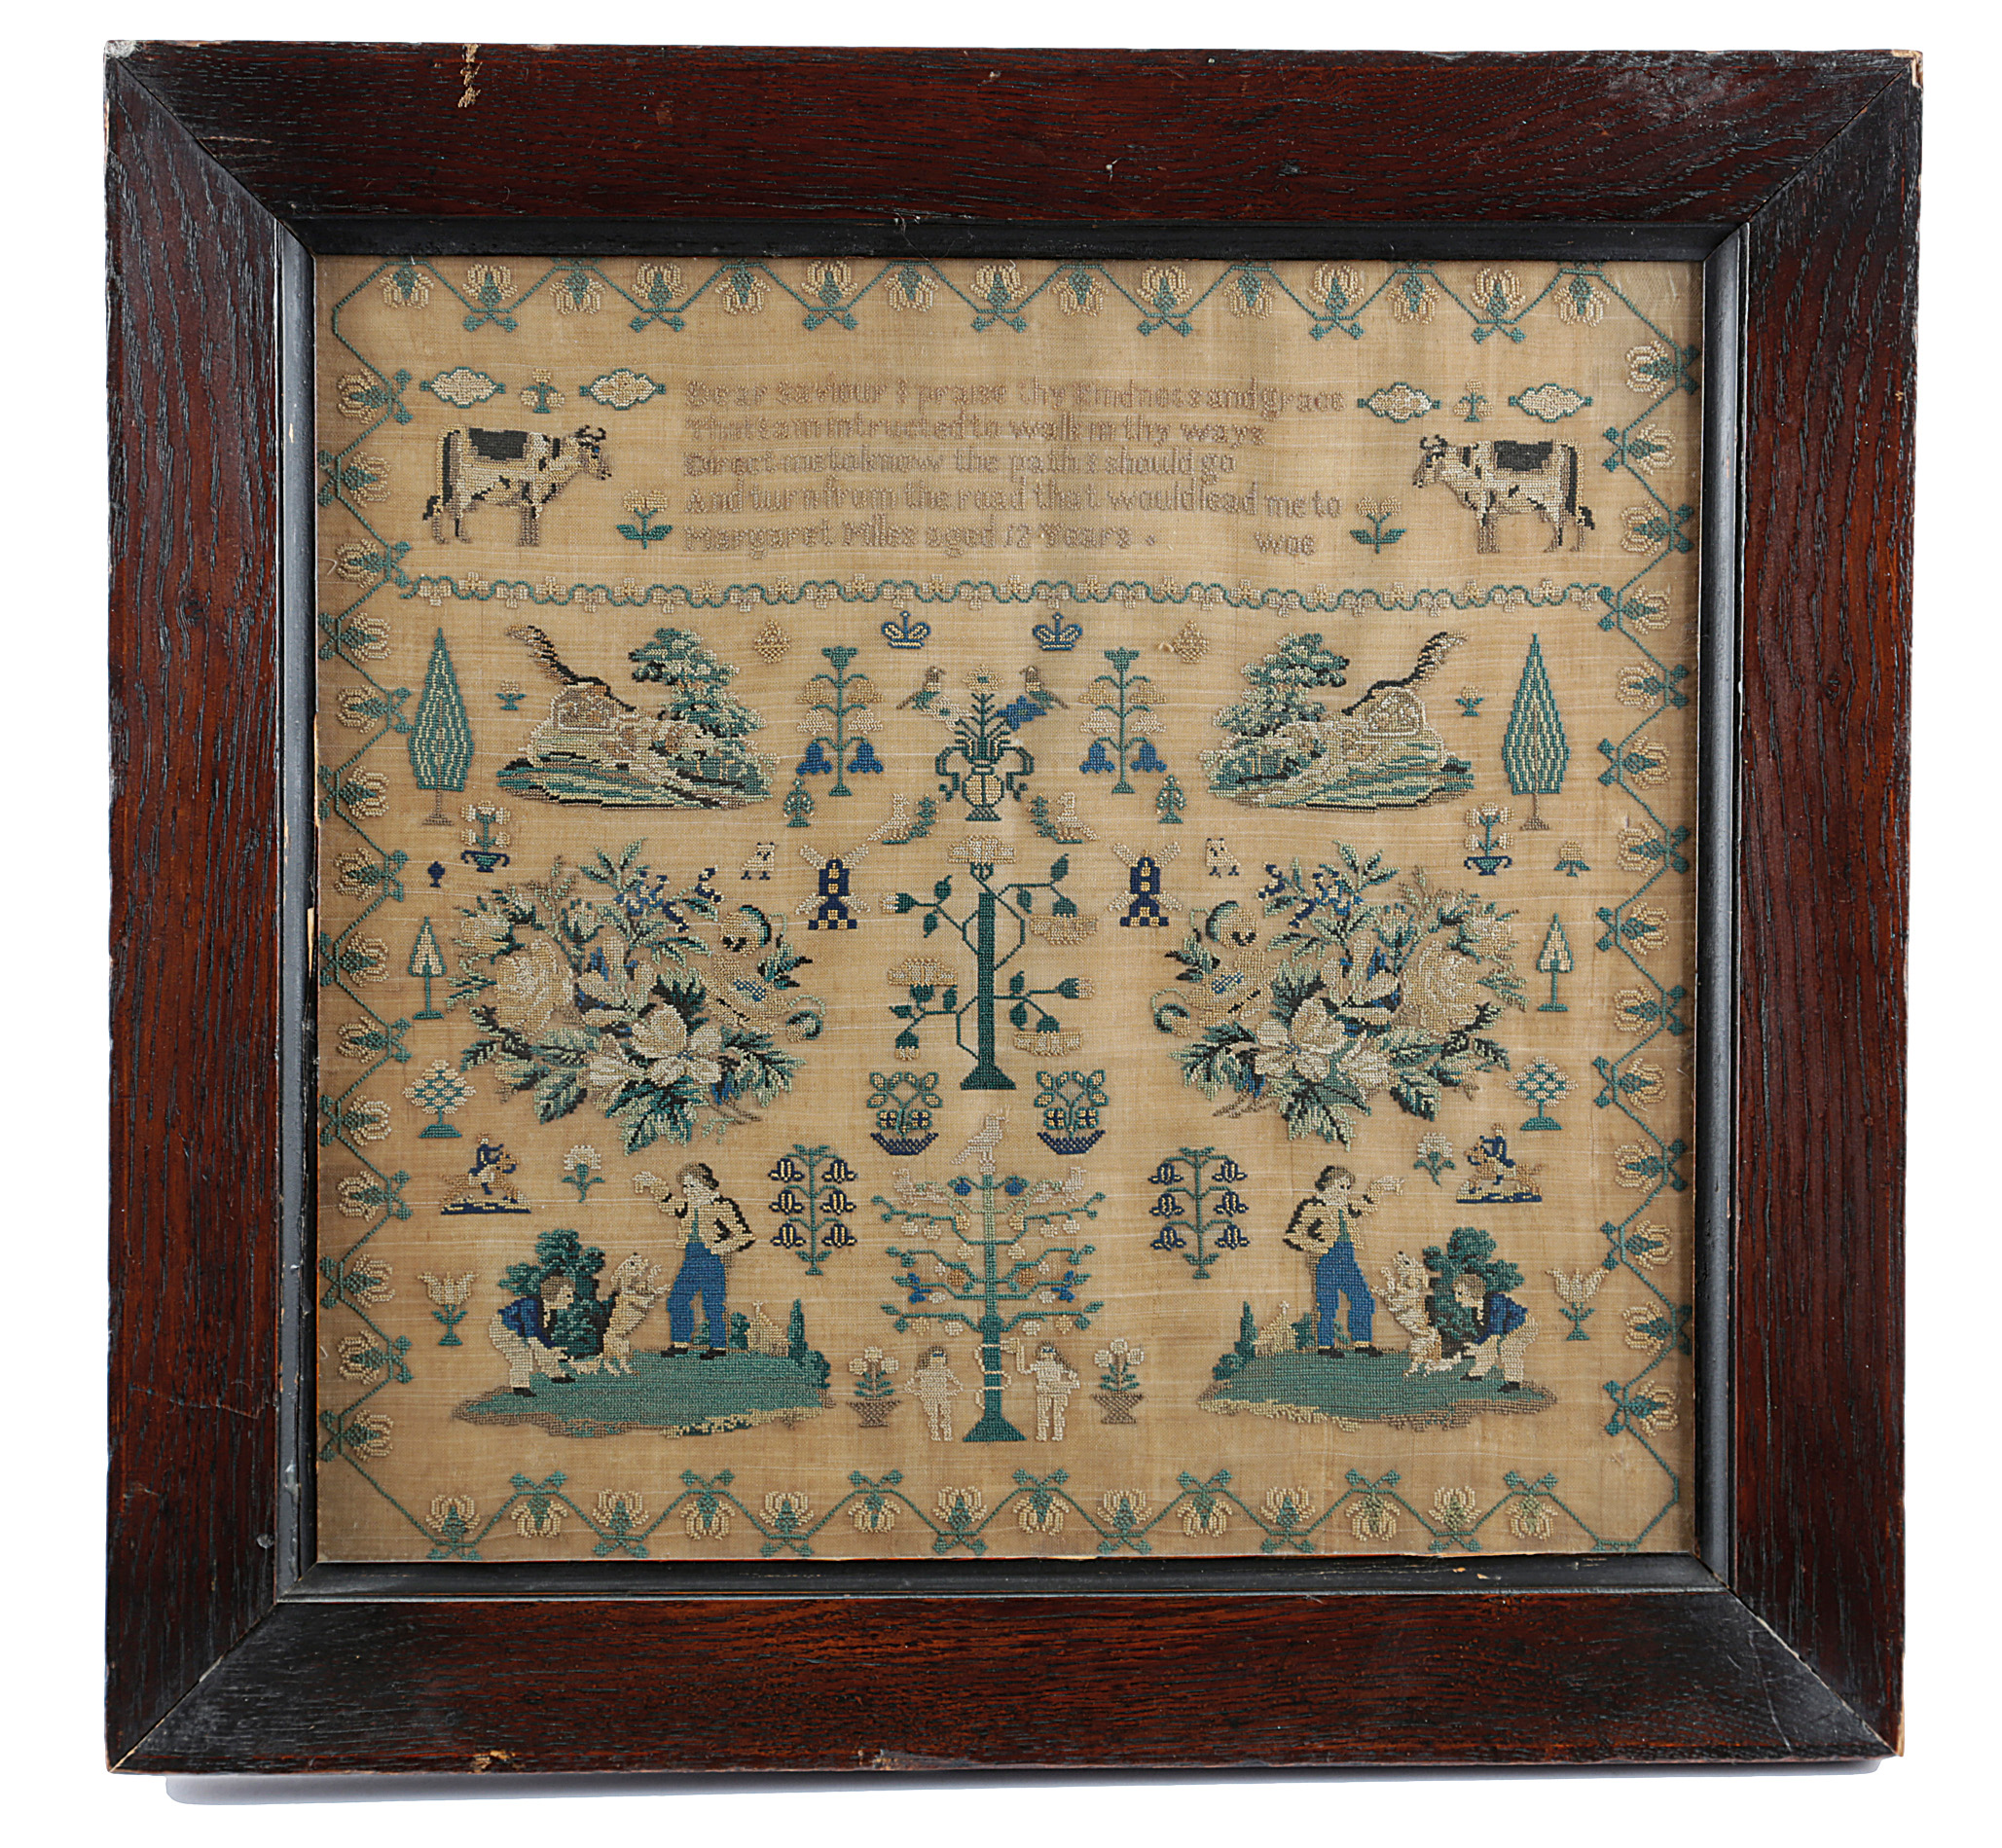 A NEEDLEWORK SAMPLER BY MARGARET MILES, C.1840 worked with polychrome silks on a fine linen